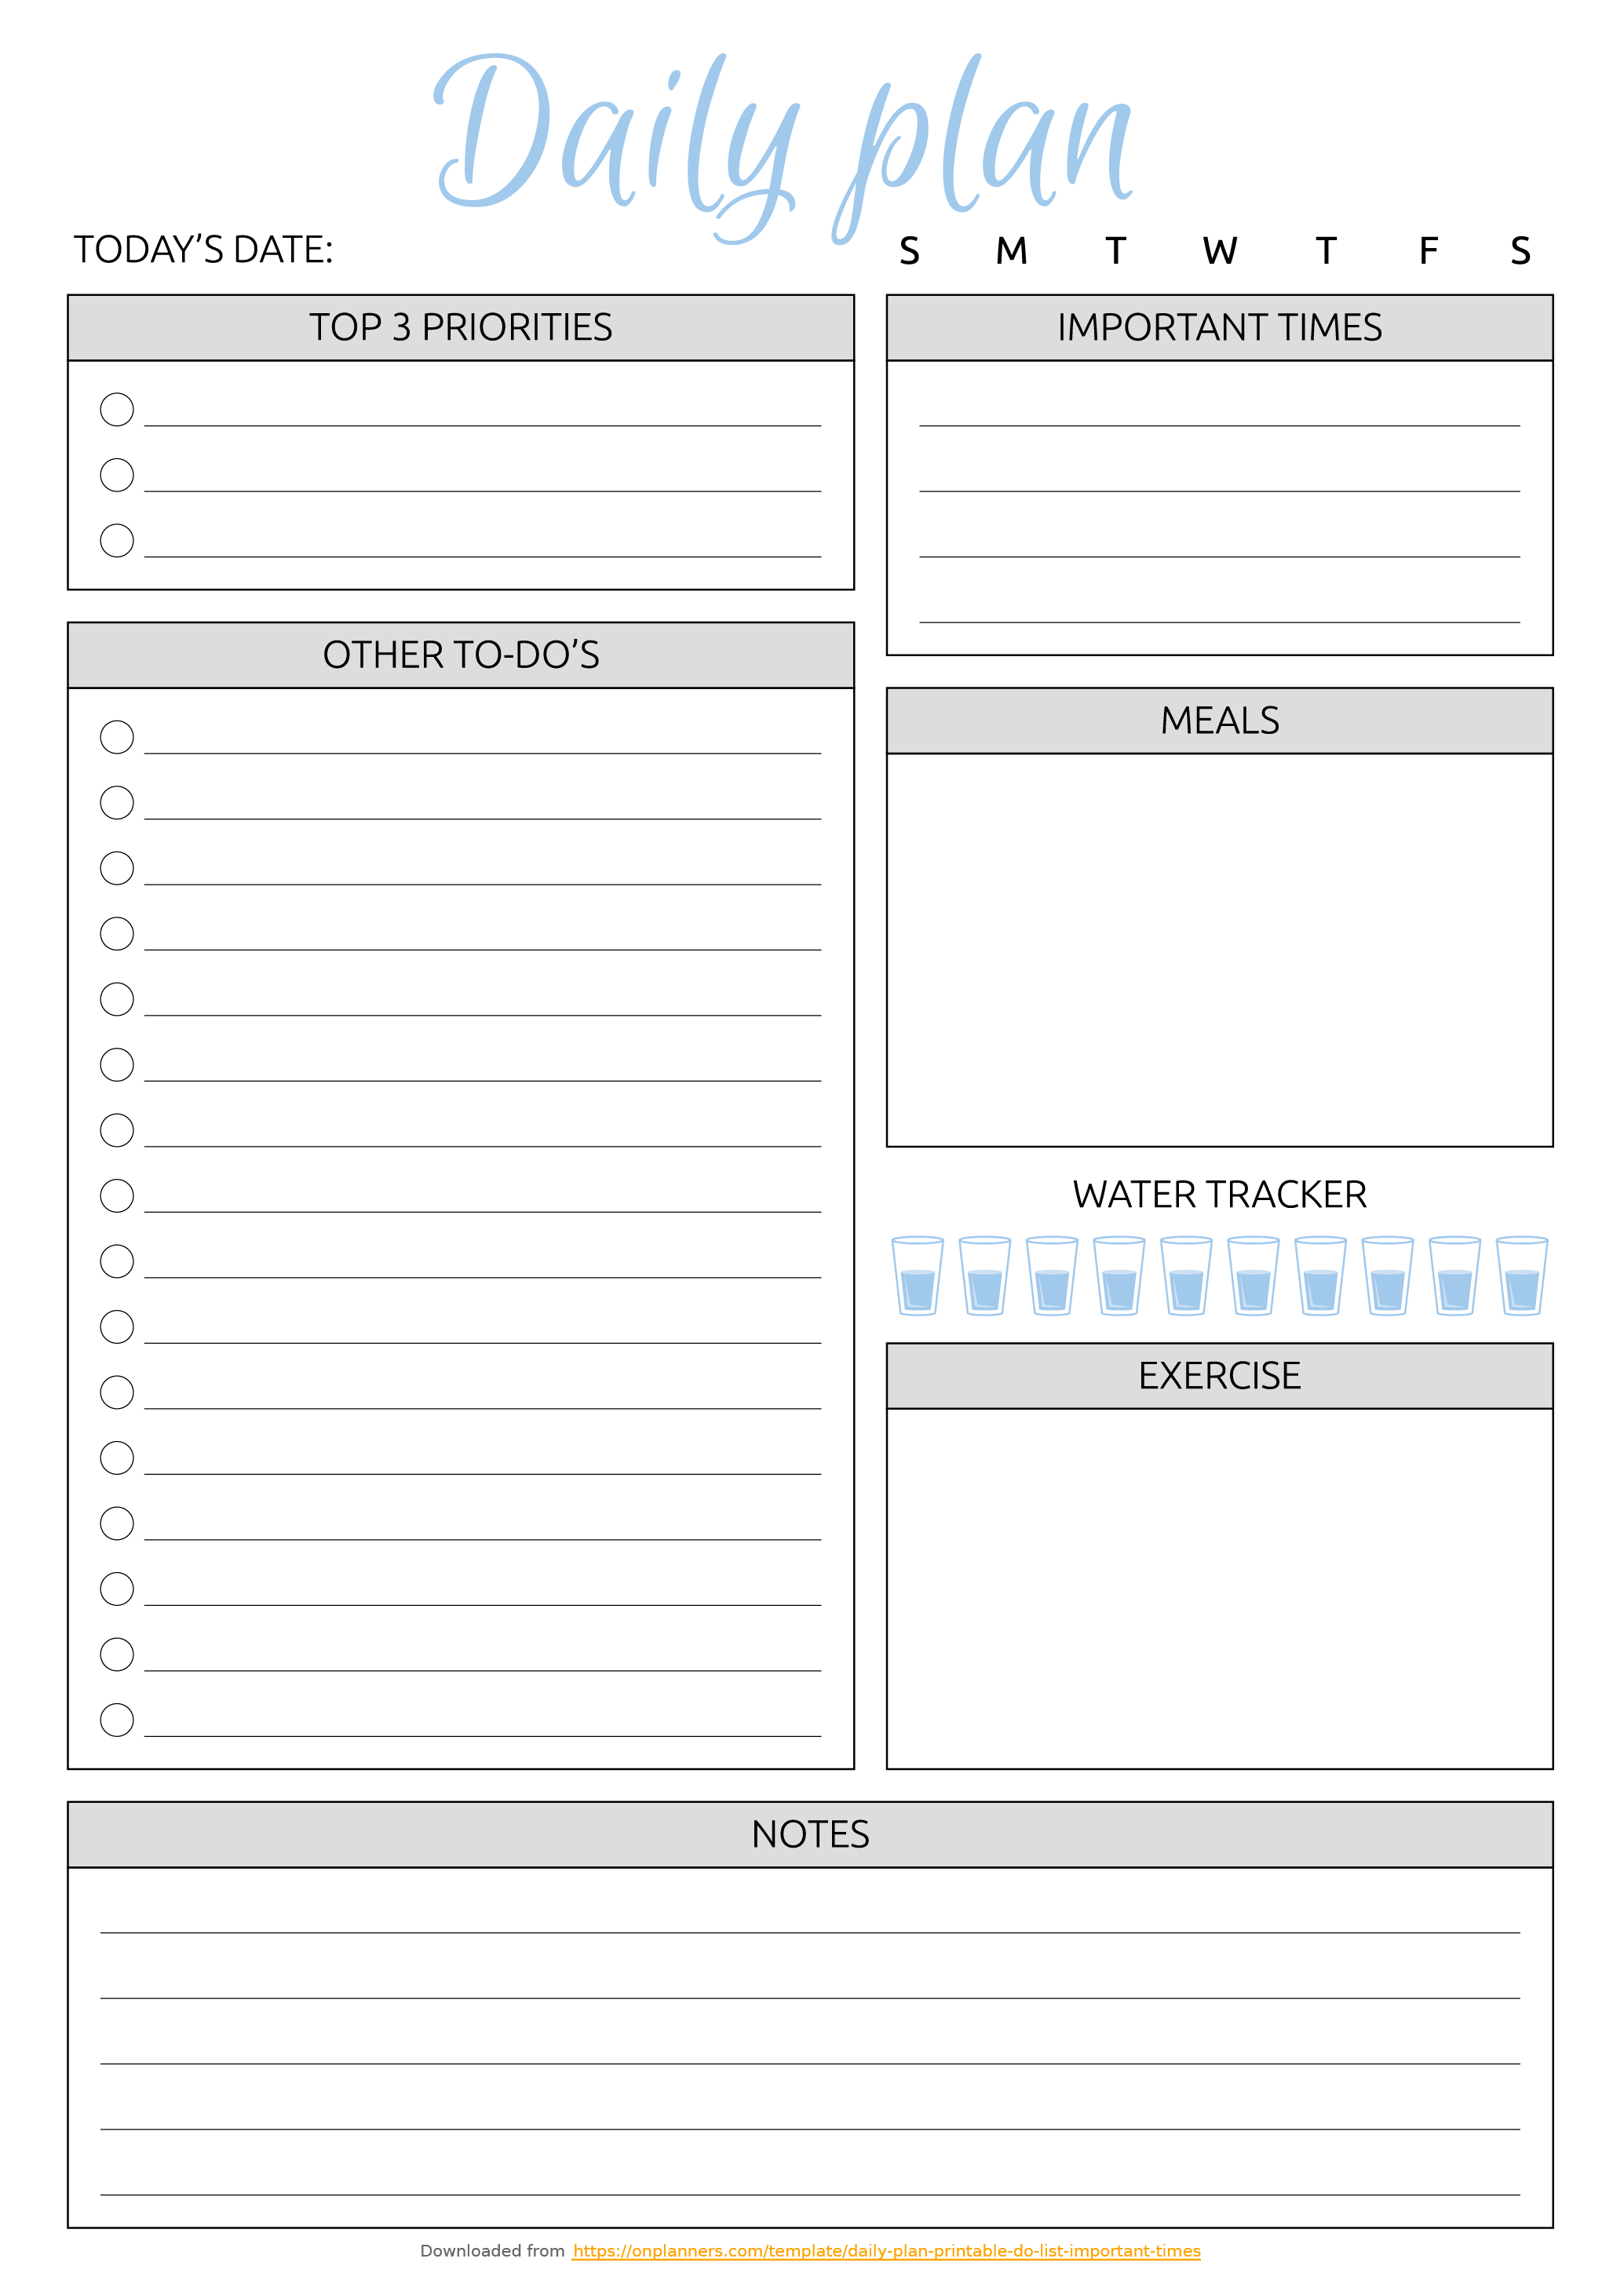 Free Printable Daily Plan With To-Do List &amp;amp; Important Times Pdf Download - Free Printable List